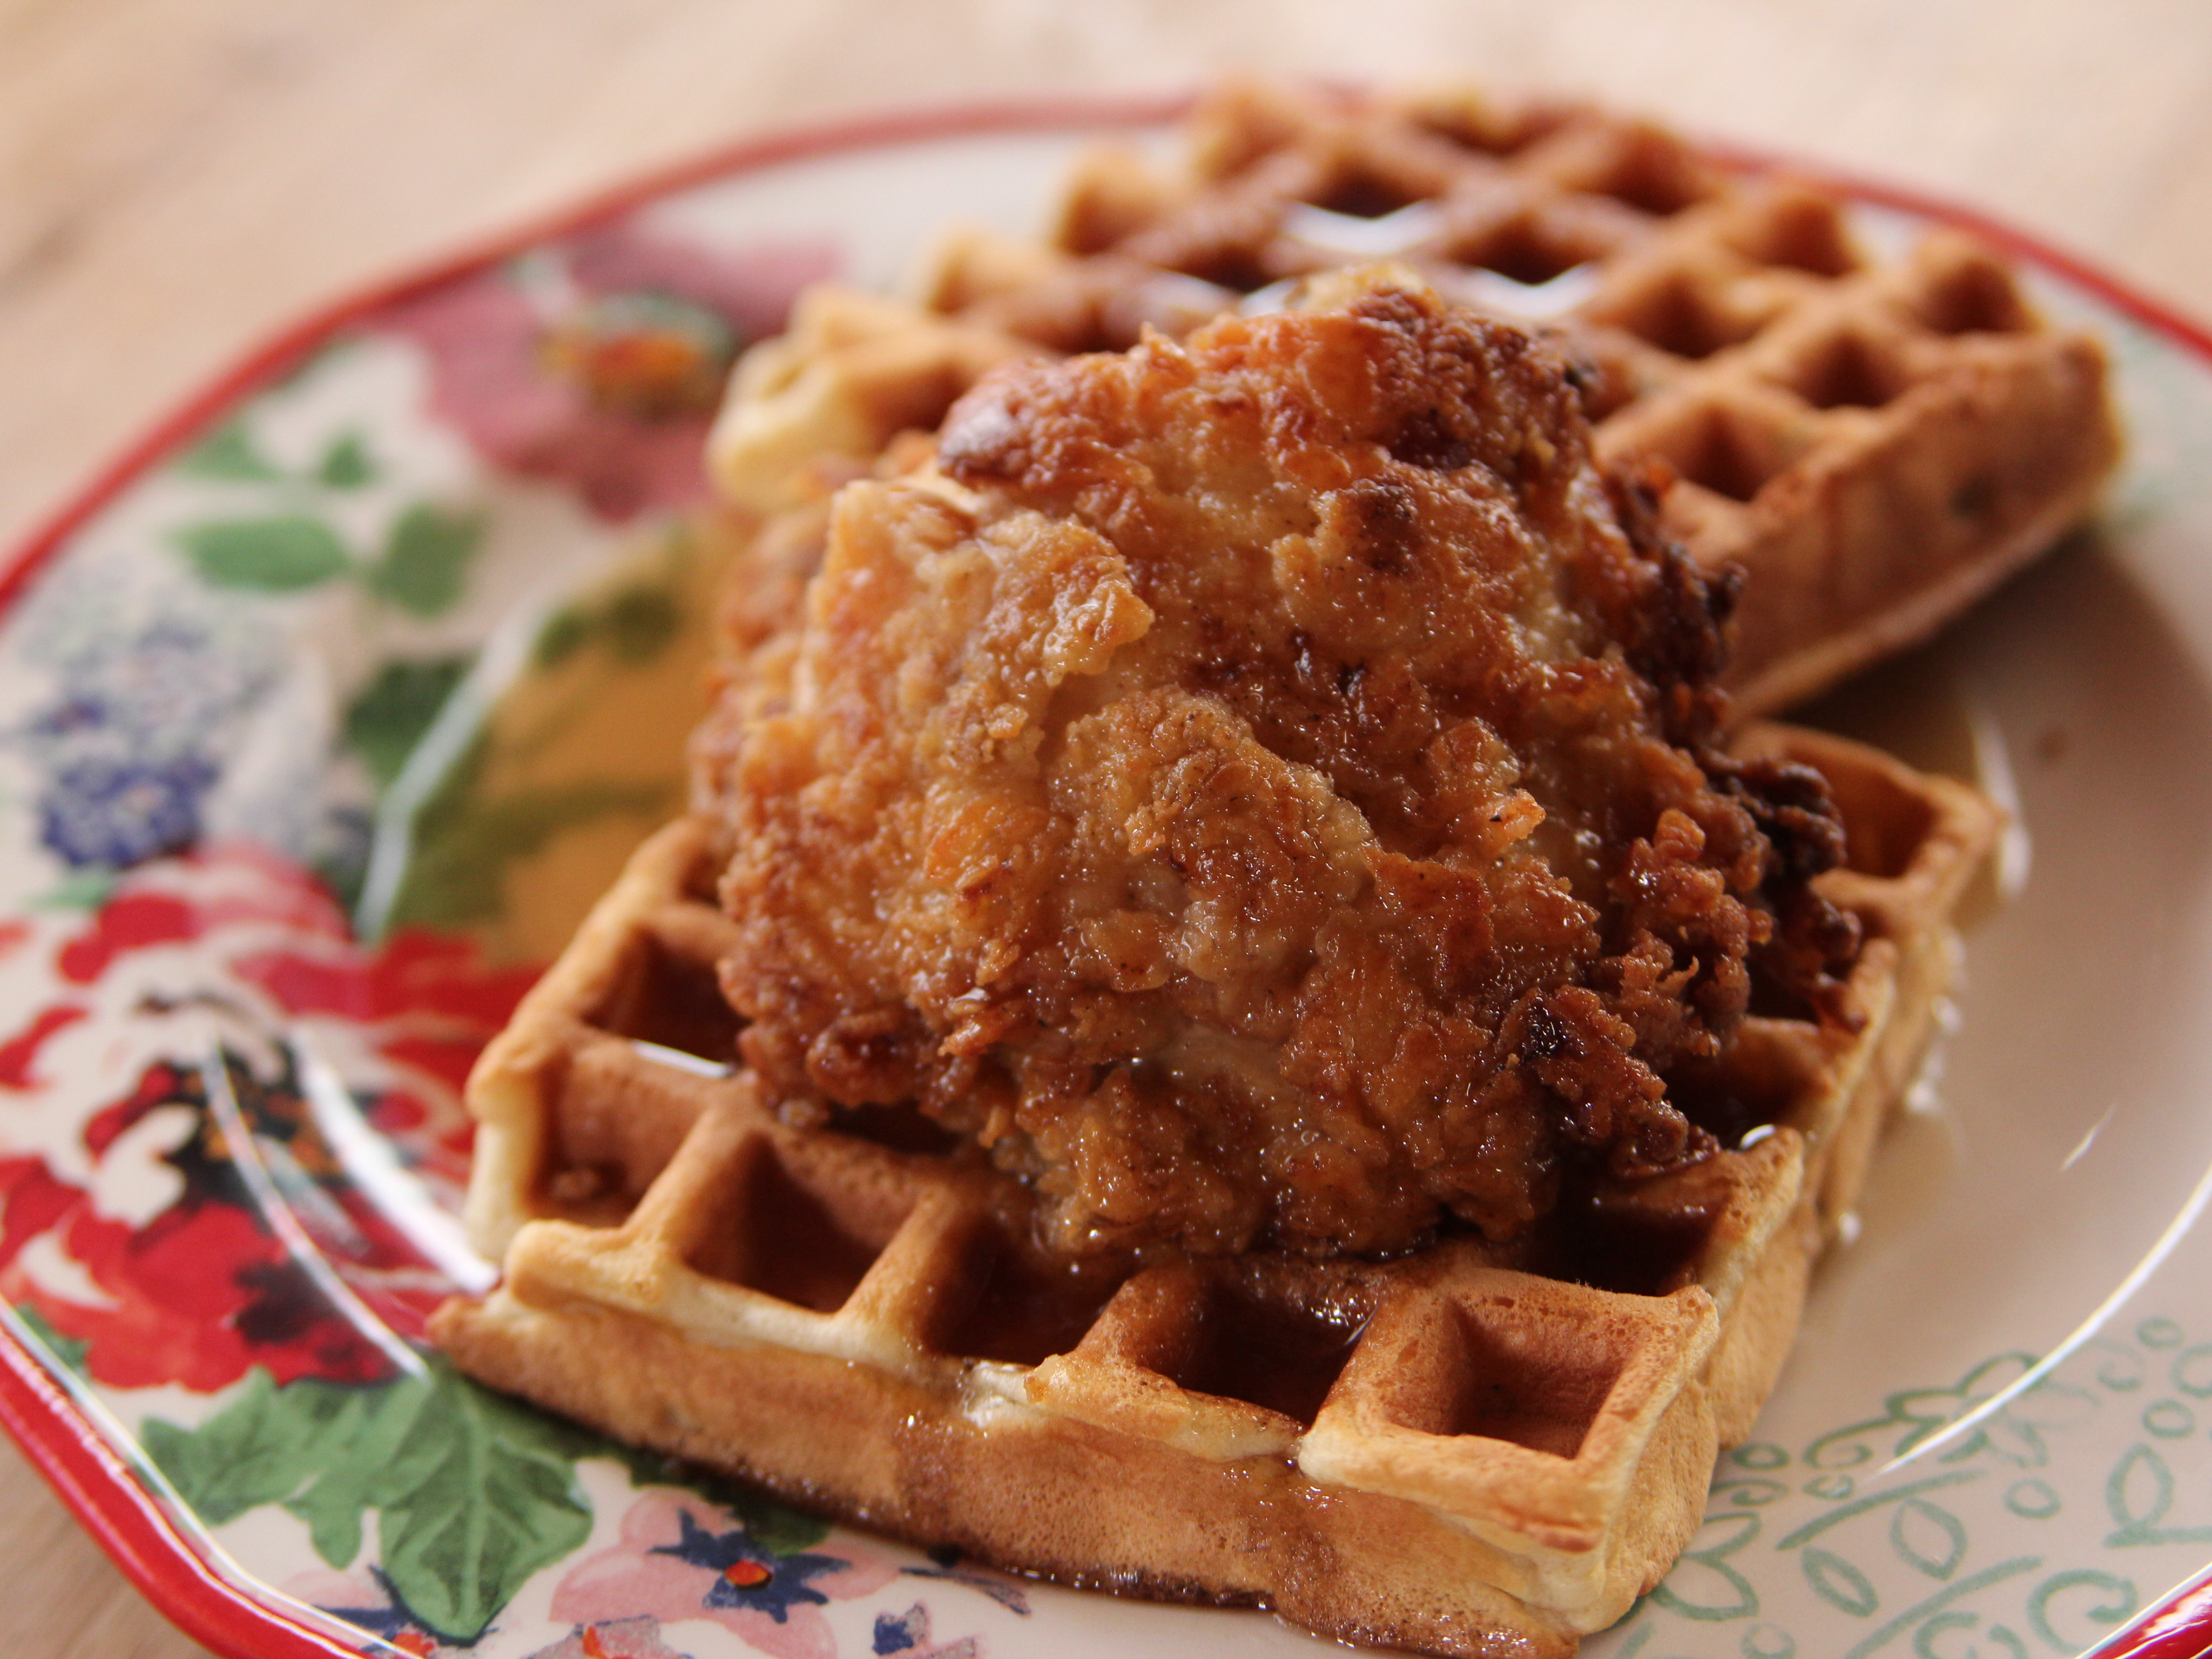 https://www.foodnetwork.com/content/dam/images/food/fullset/2015/10/9/4/WU1110H_Chicken-and-Waffles_s4x3.jpg